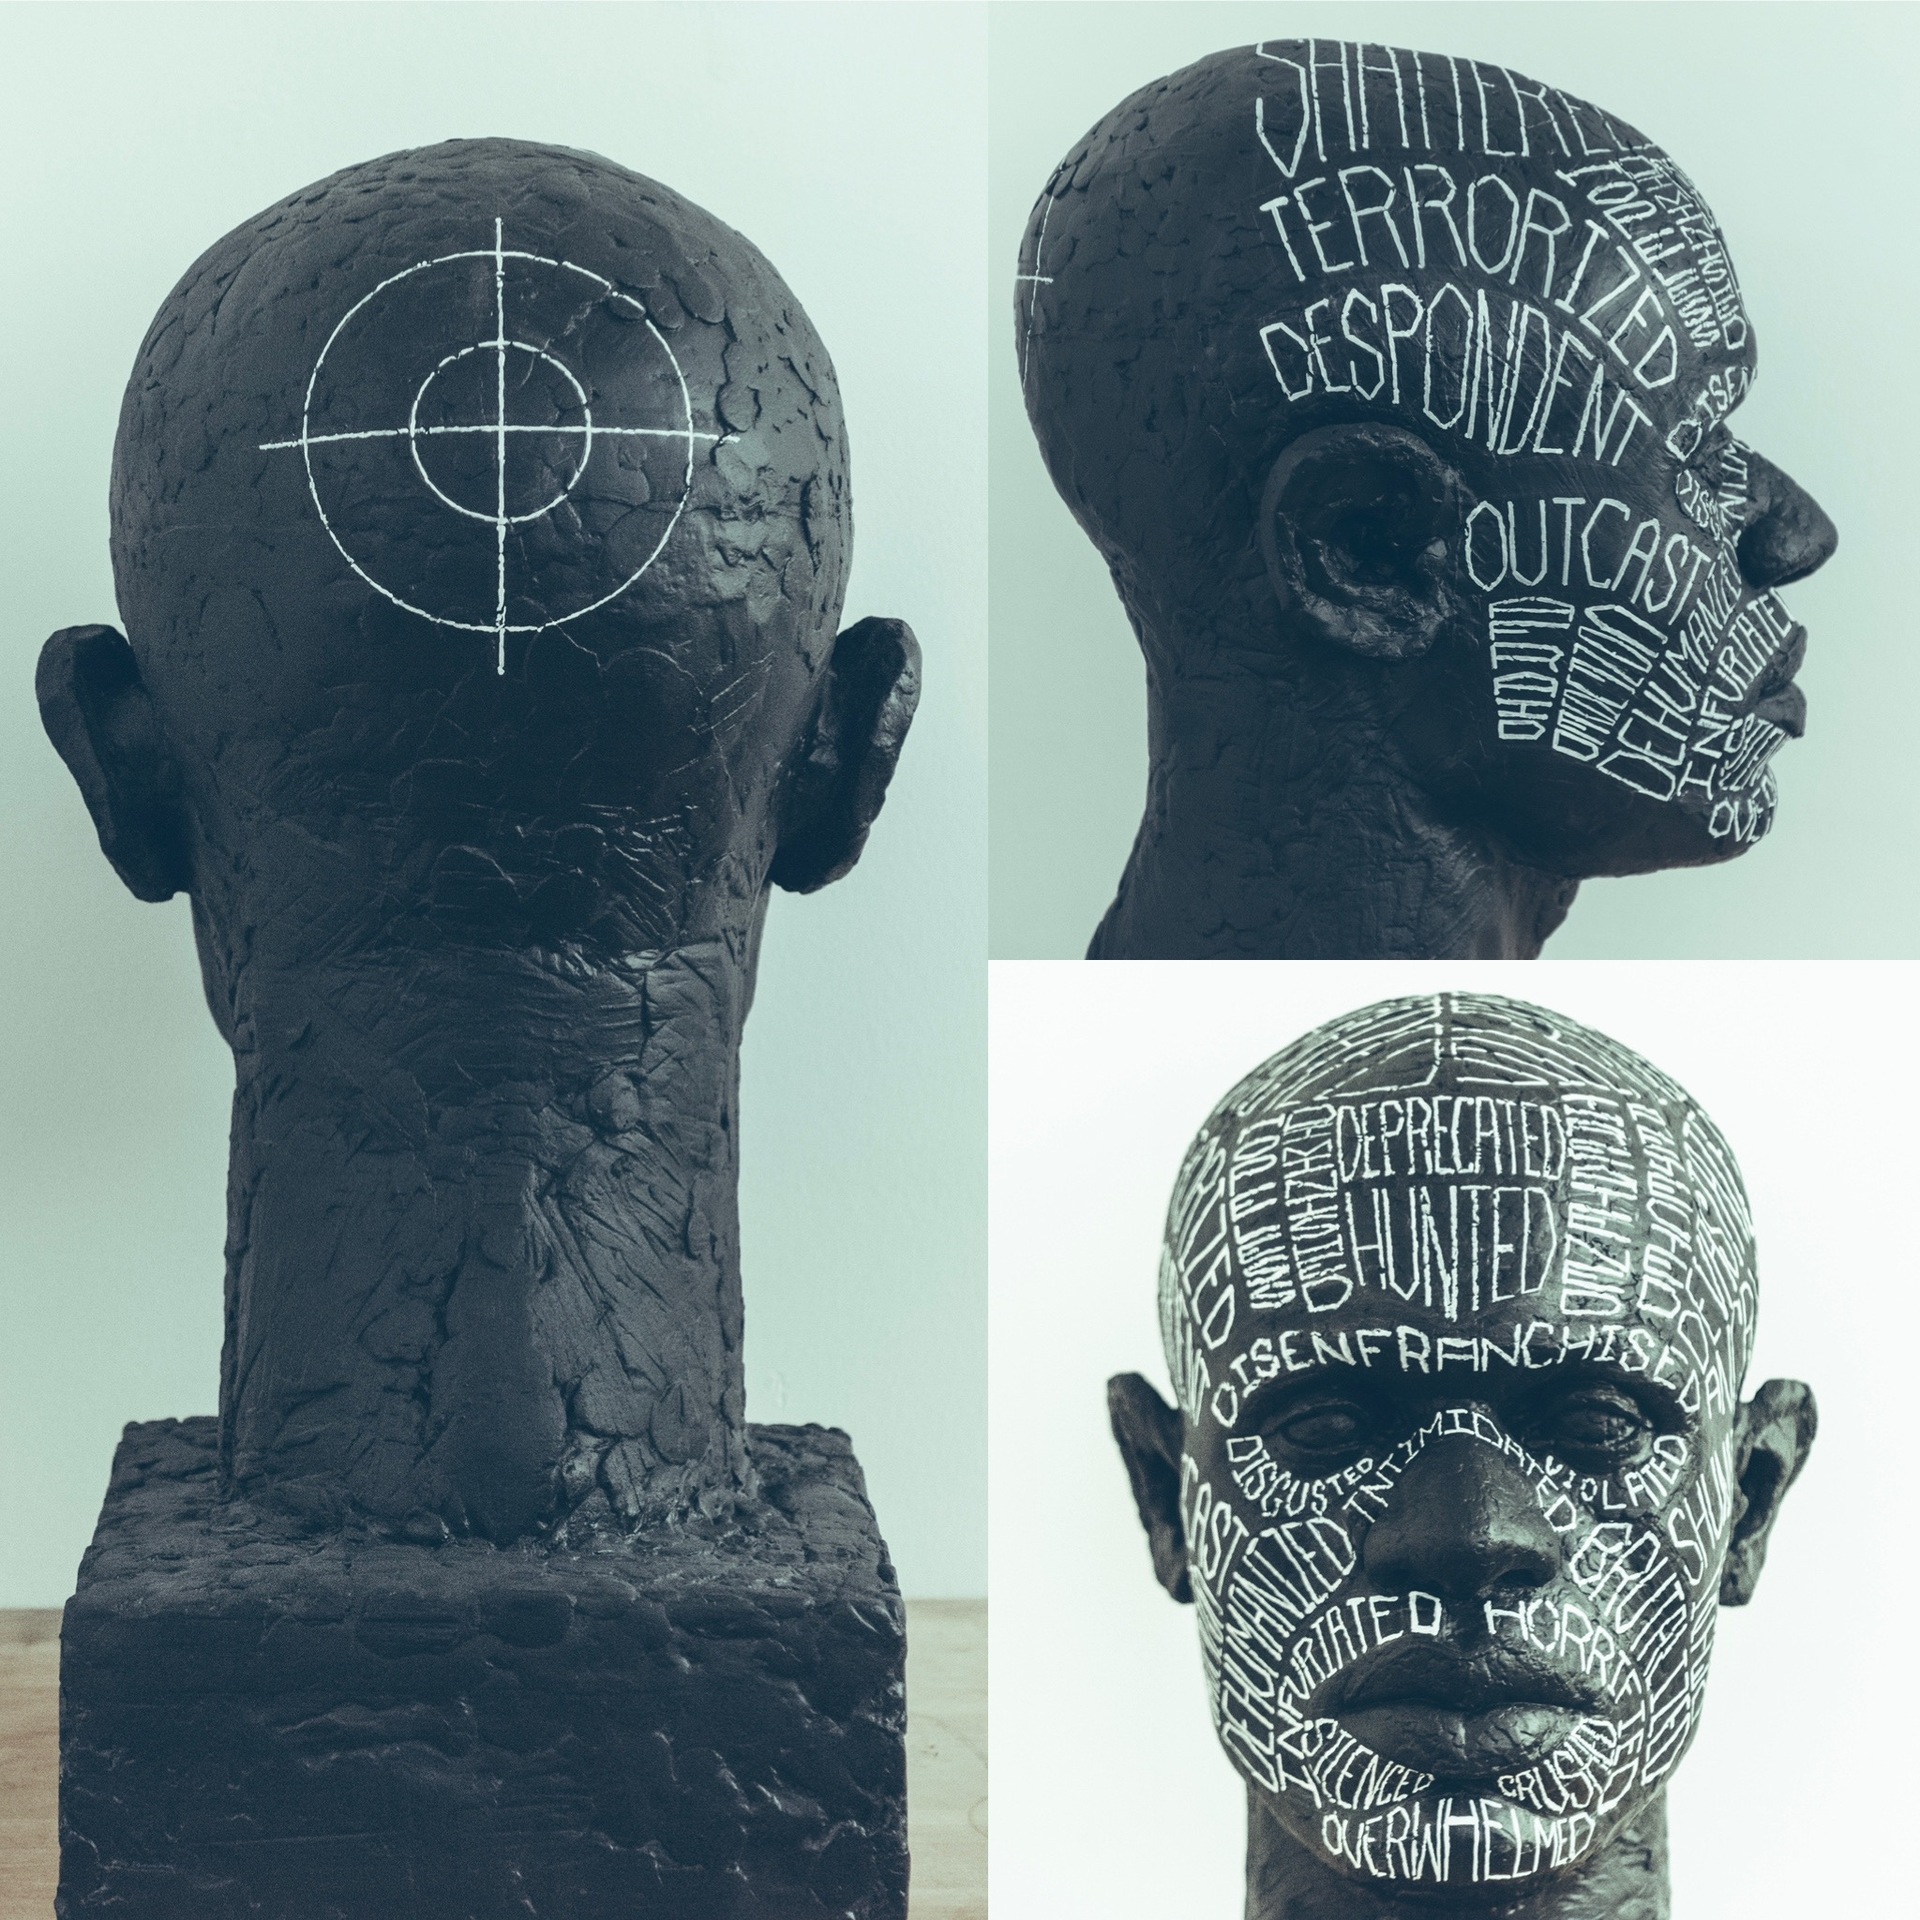 Jason McCormack A Marked Man, 2018 sculpted in clay, casted in aqua resin, ink hand-lettering. 30 x 19 x 17” Image use courtesy of the artist